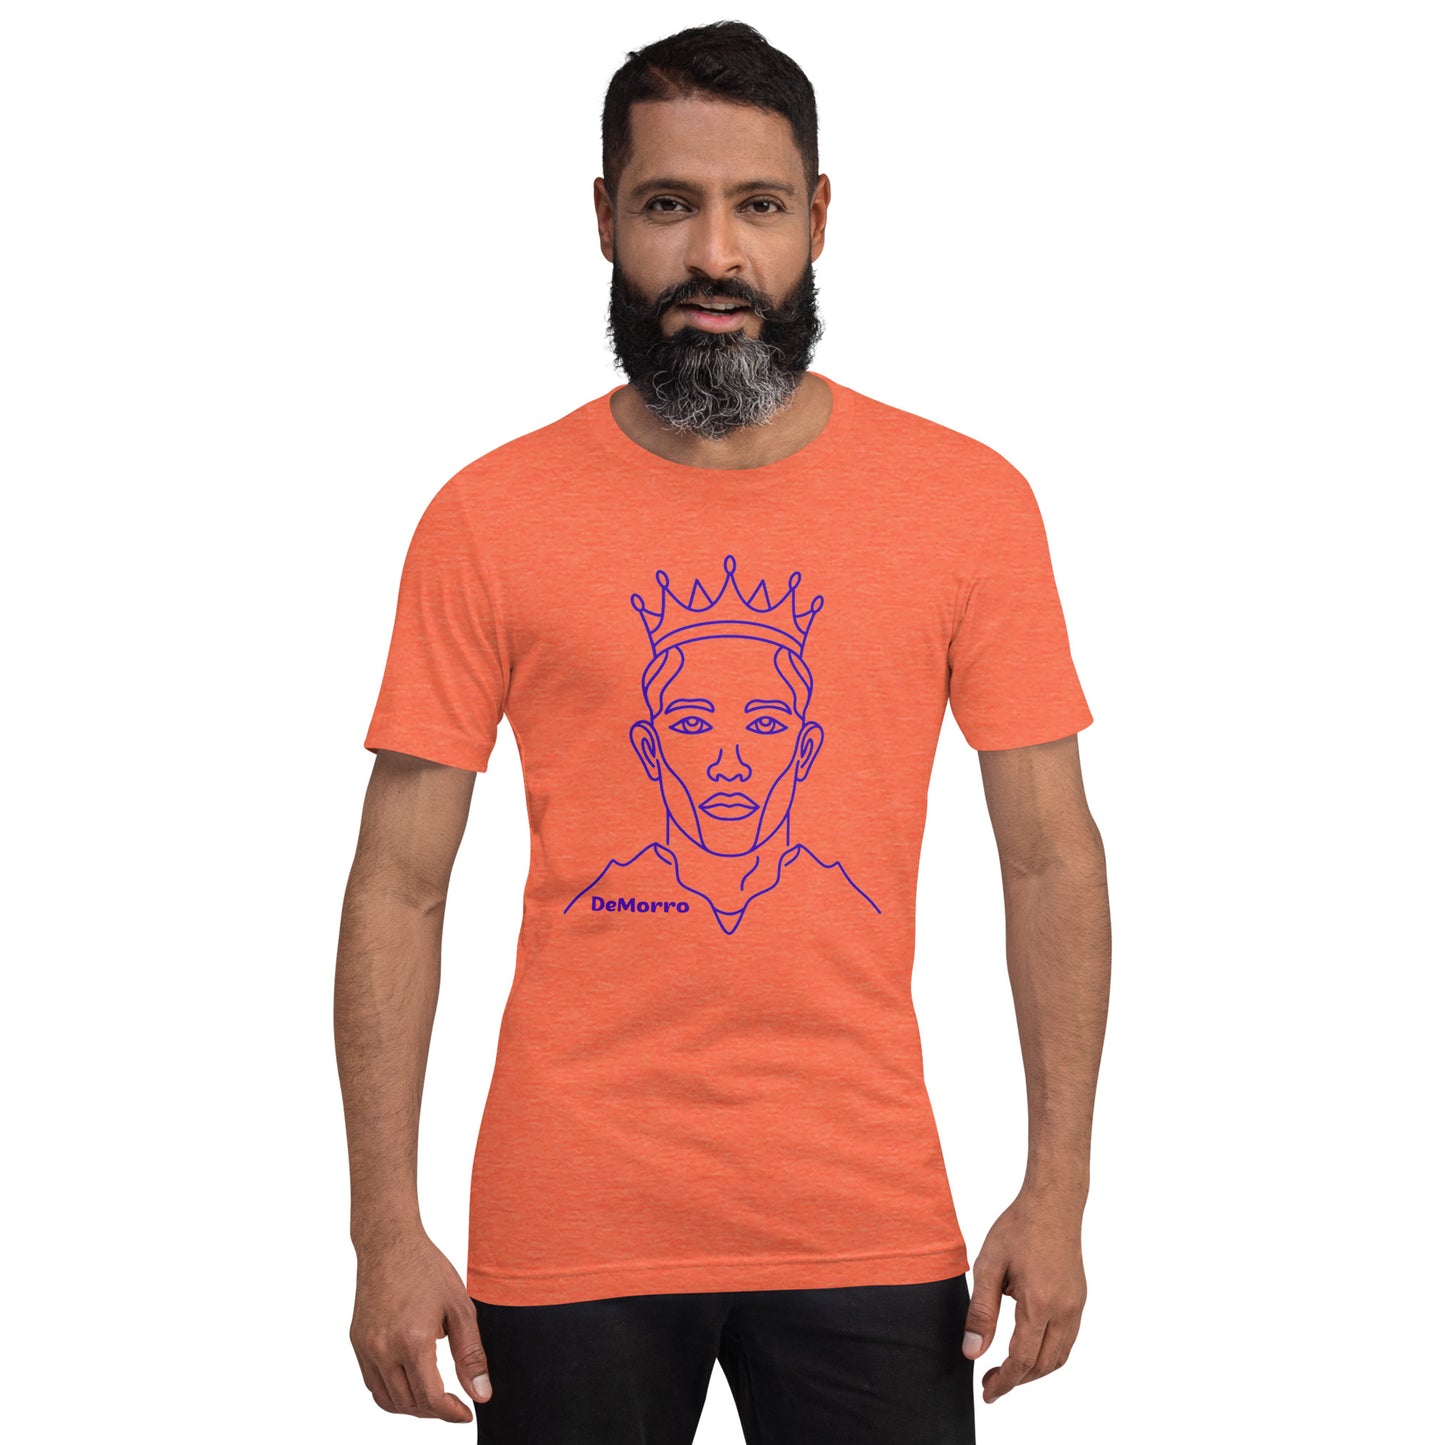 "A King is He" - Unisex t-shirt